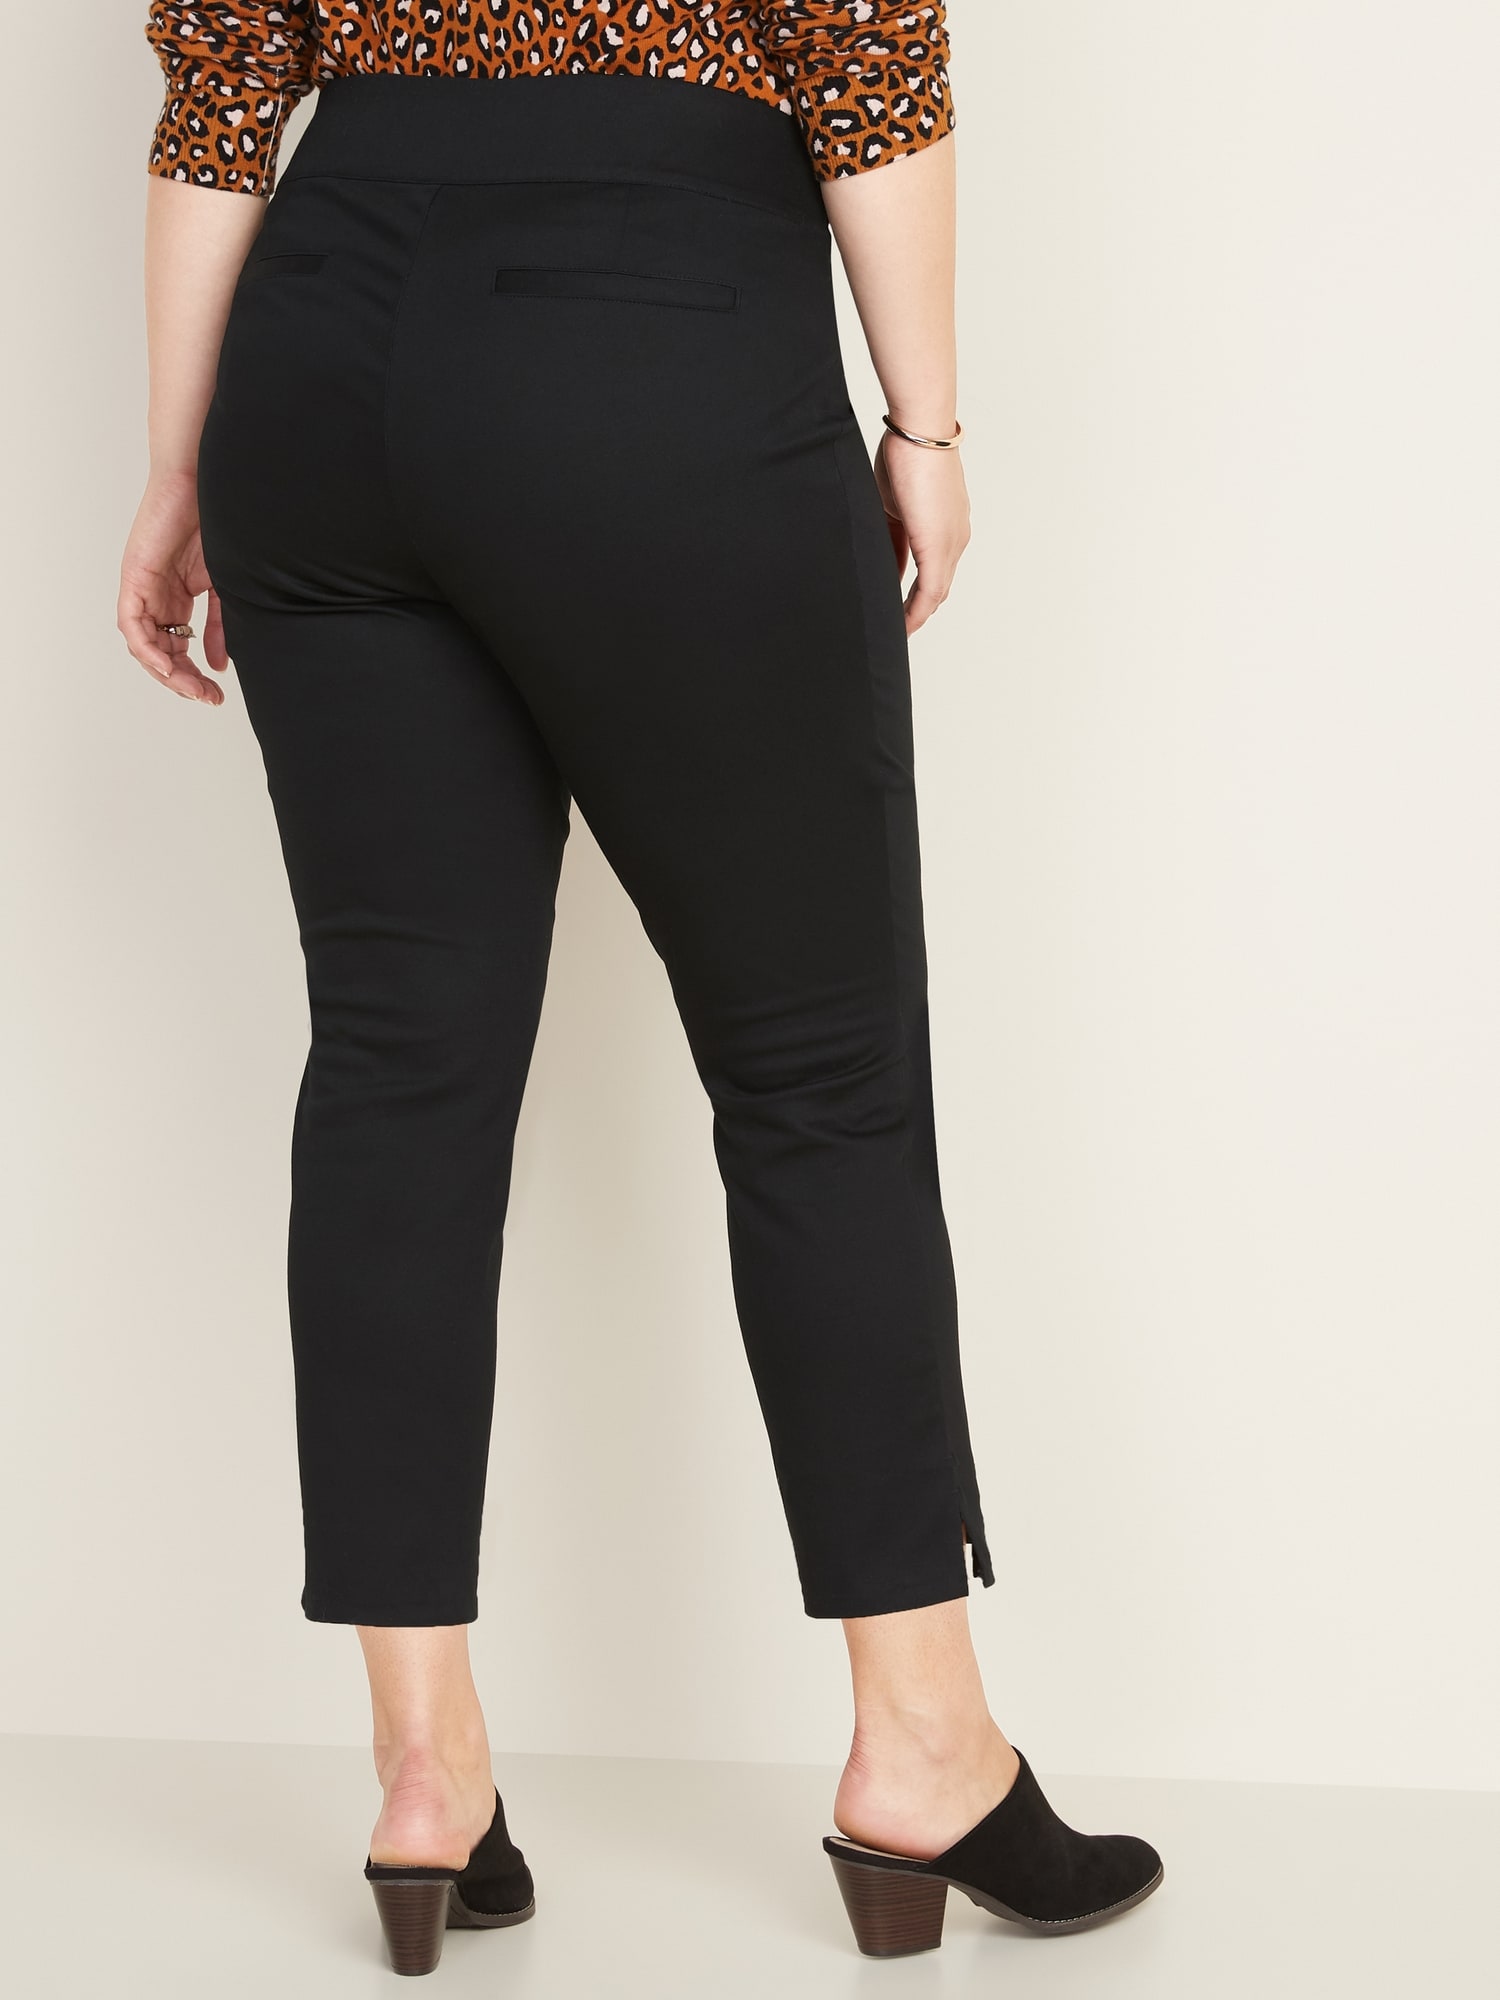 High-Waisted Plus-Size Pull-On Pants | Old Navy